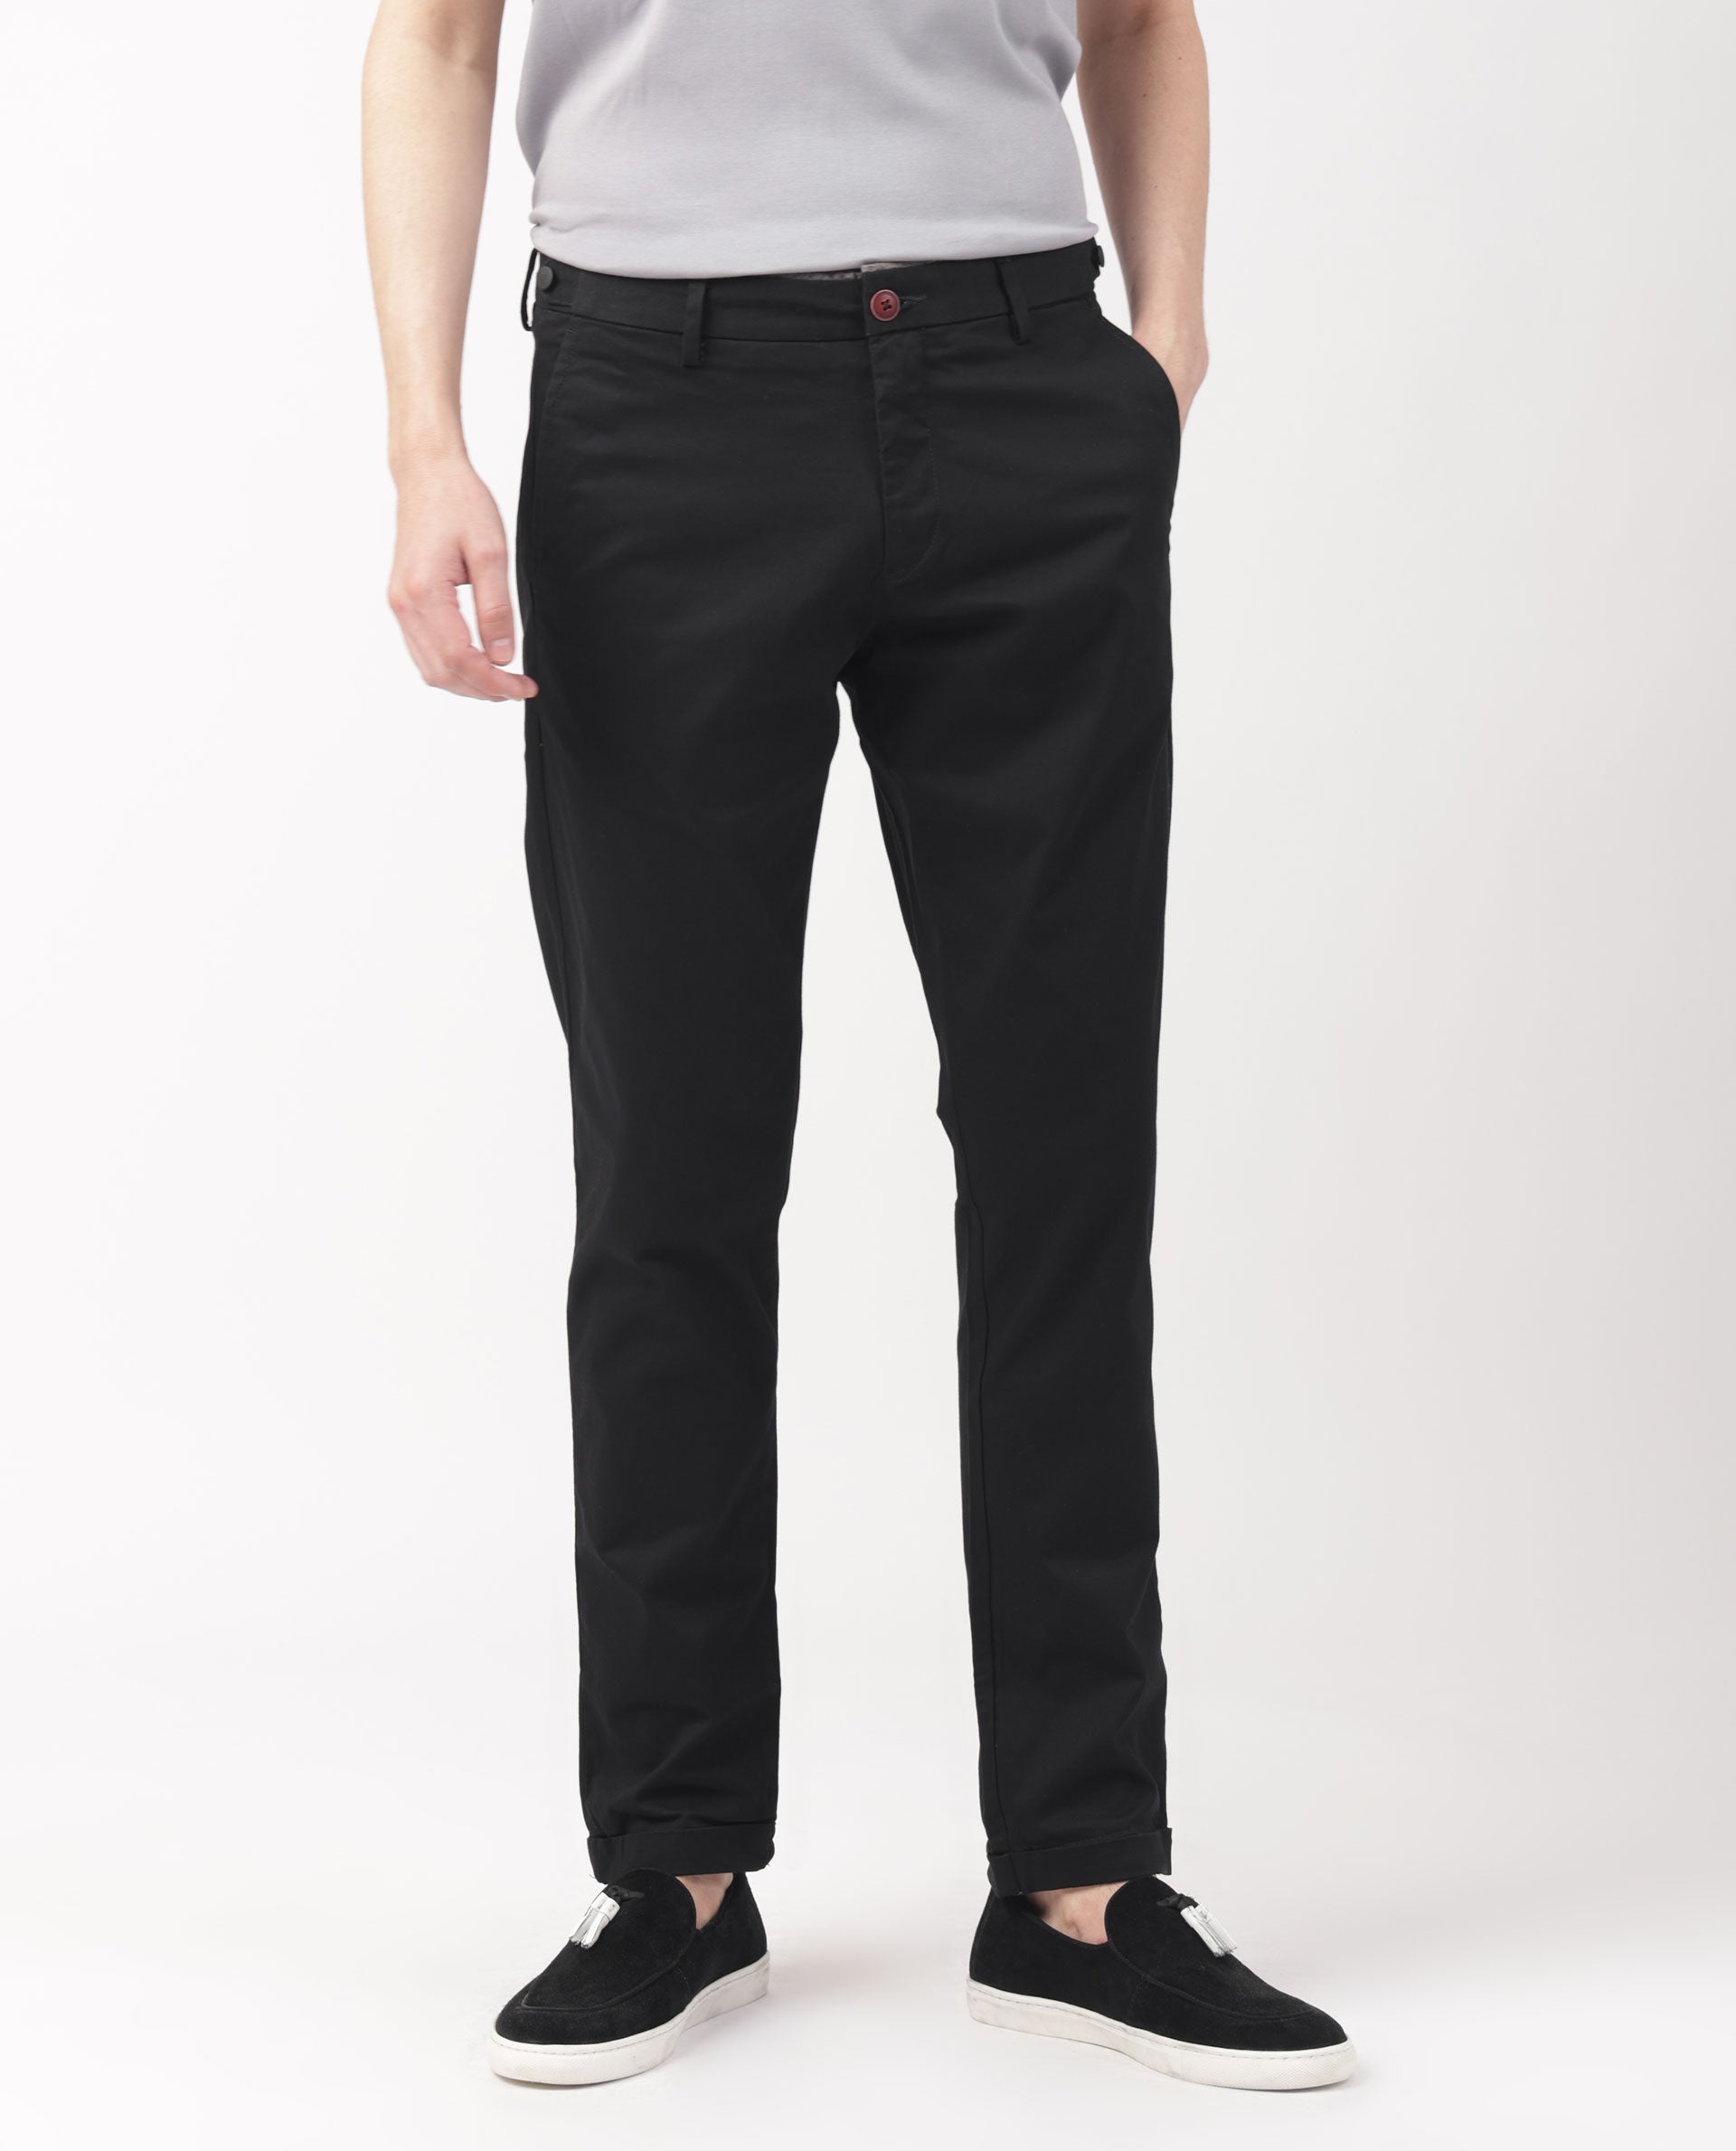 Check Formal Trousers In Black B95 Norm